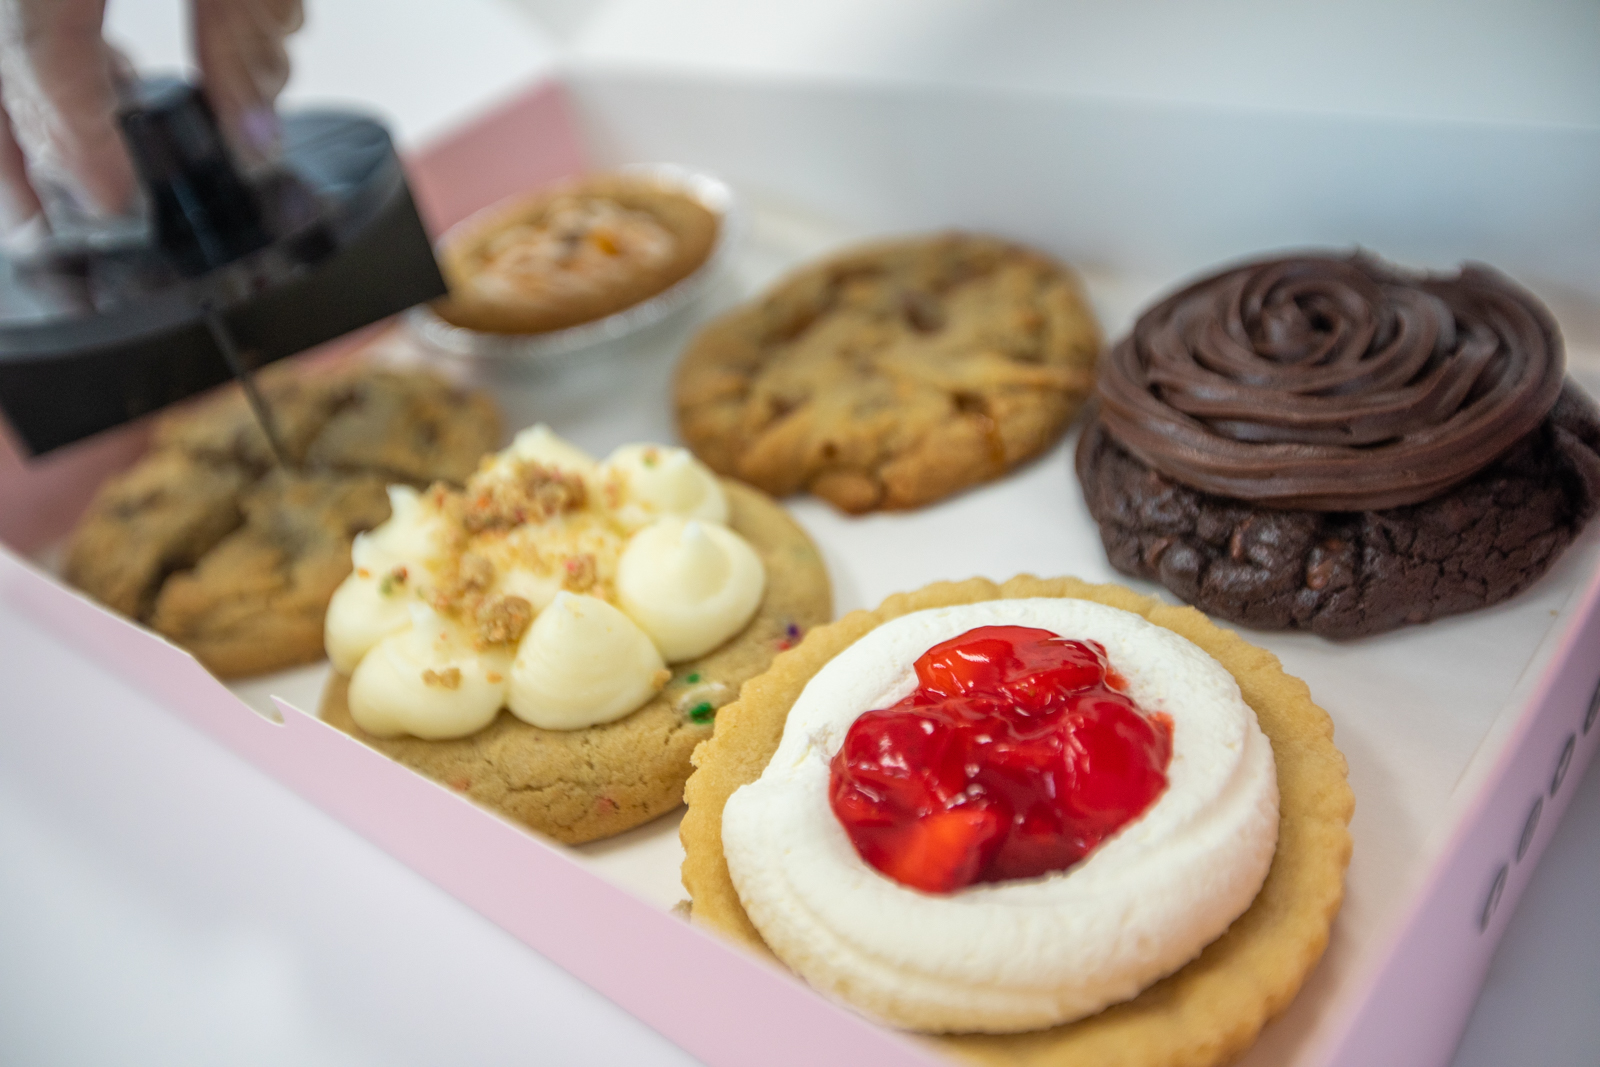 Crumbl Cookies arrives in Sioux Falls, plans future growth here